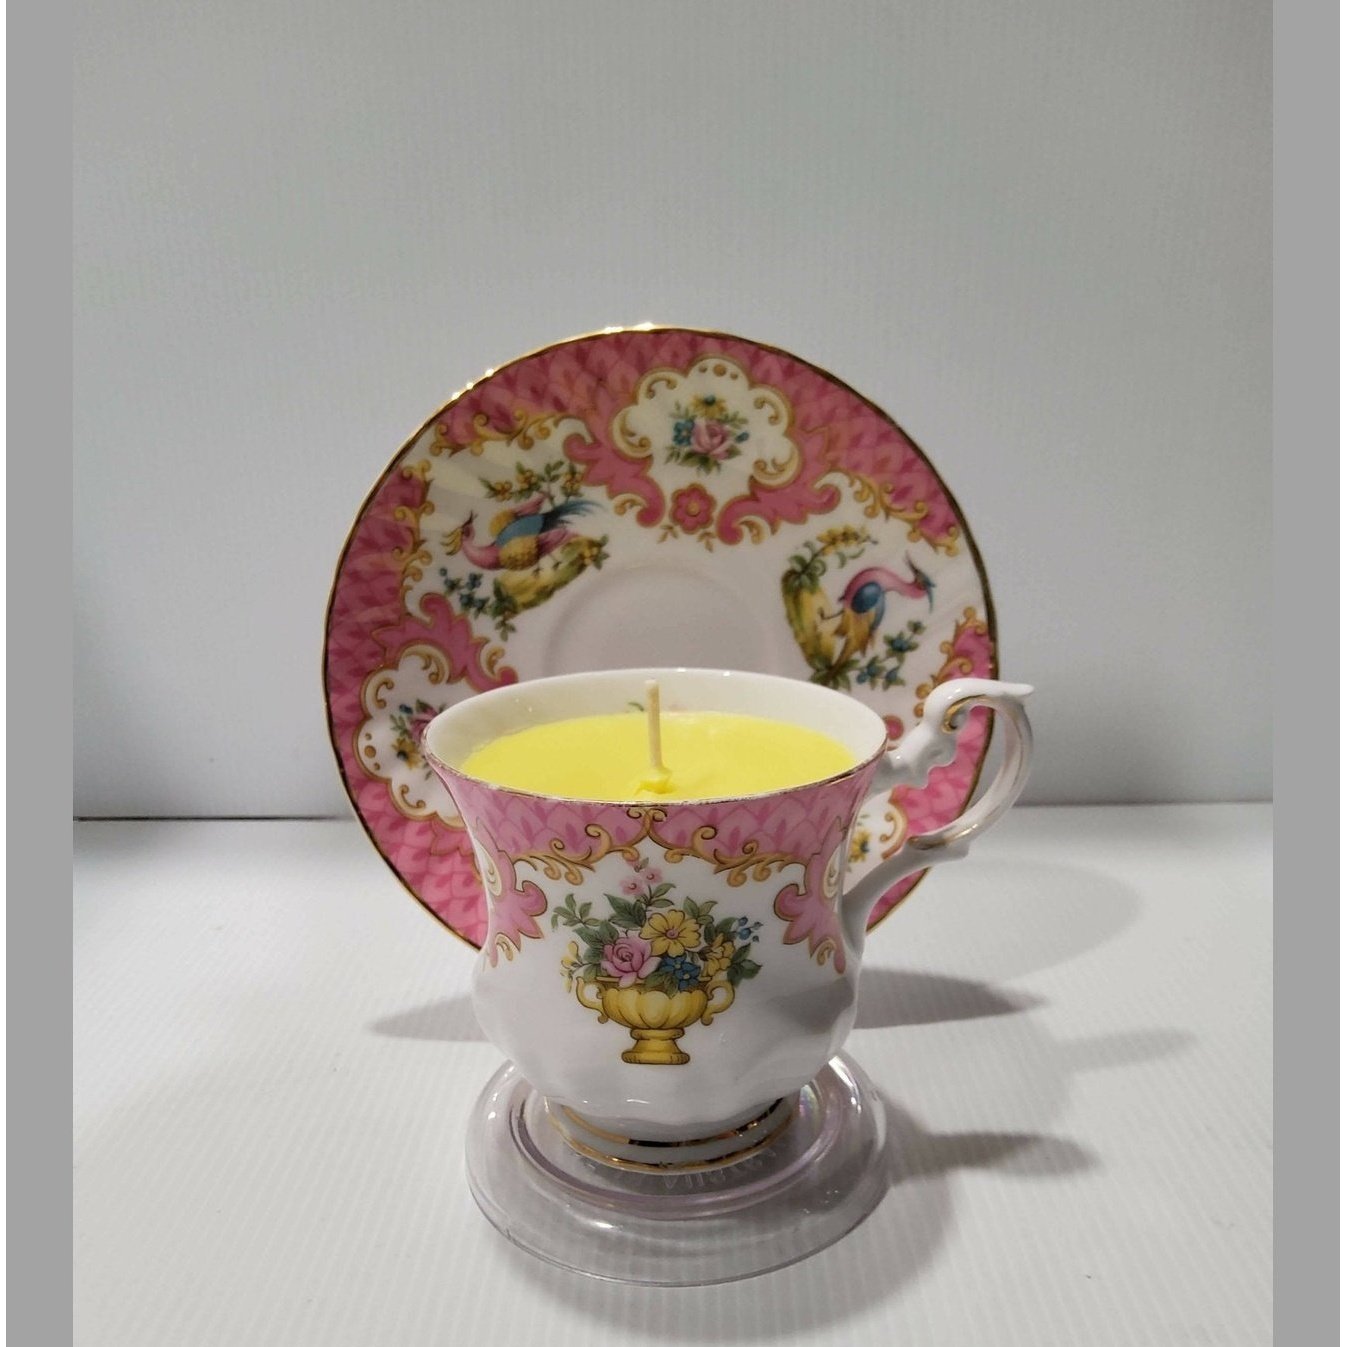 Teacup Candle - Soy Candle - Vintage Teacup - Victorian Rose Fragrance - Free Shipping - AMD Touring